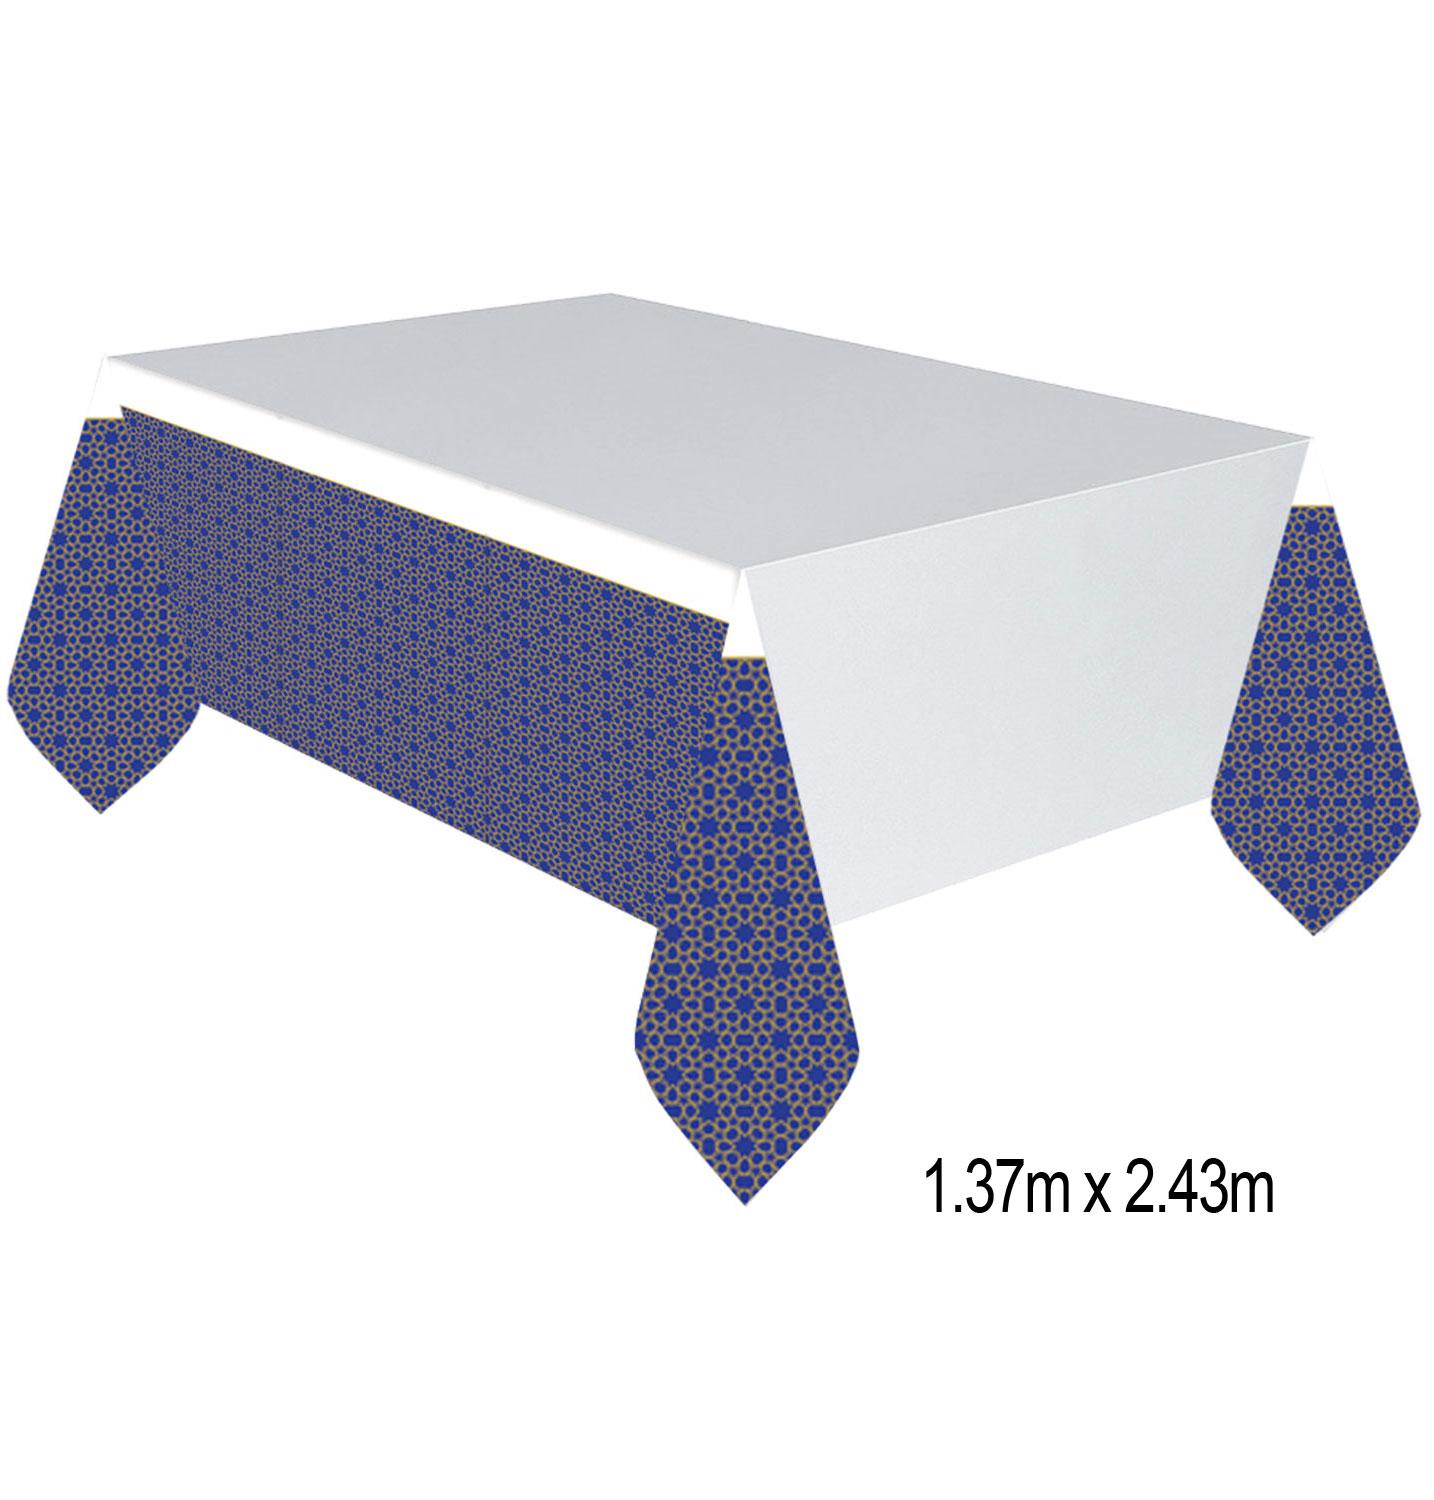 Eid Plastic Tablecover 1.37m x 2.43m by Amscan 571962 available here at Karnival Costumes online party shop